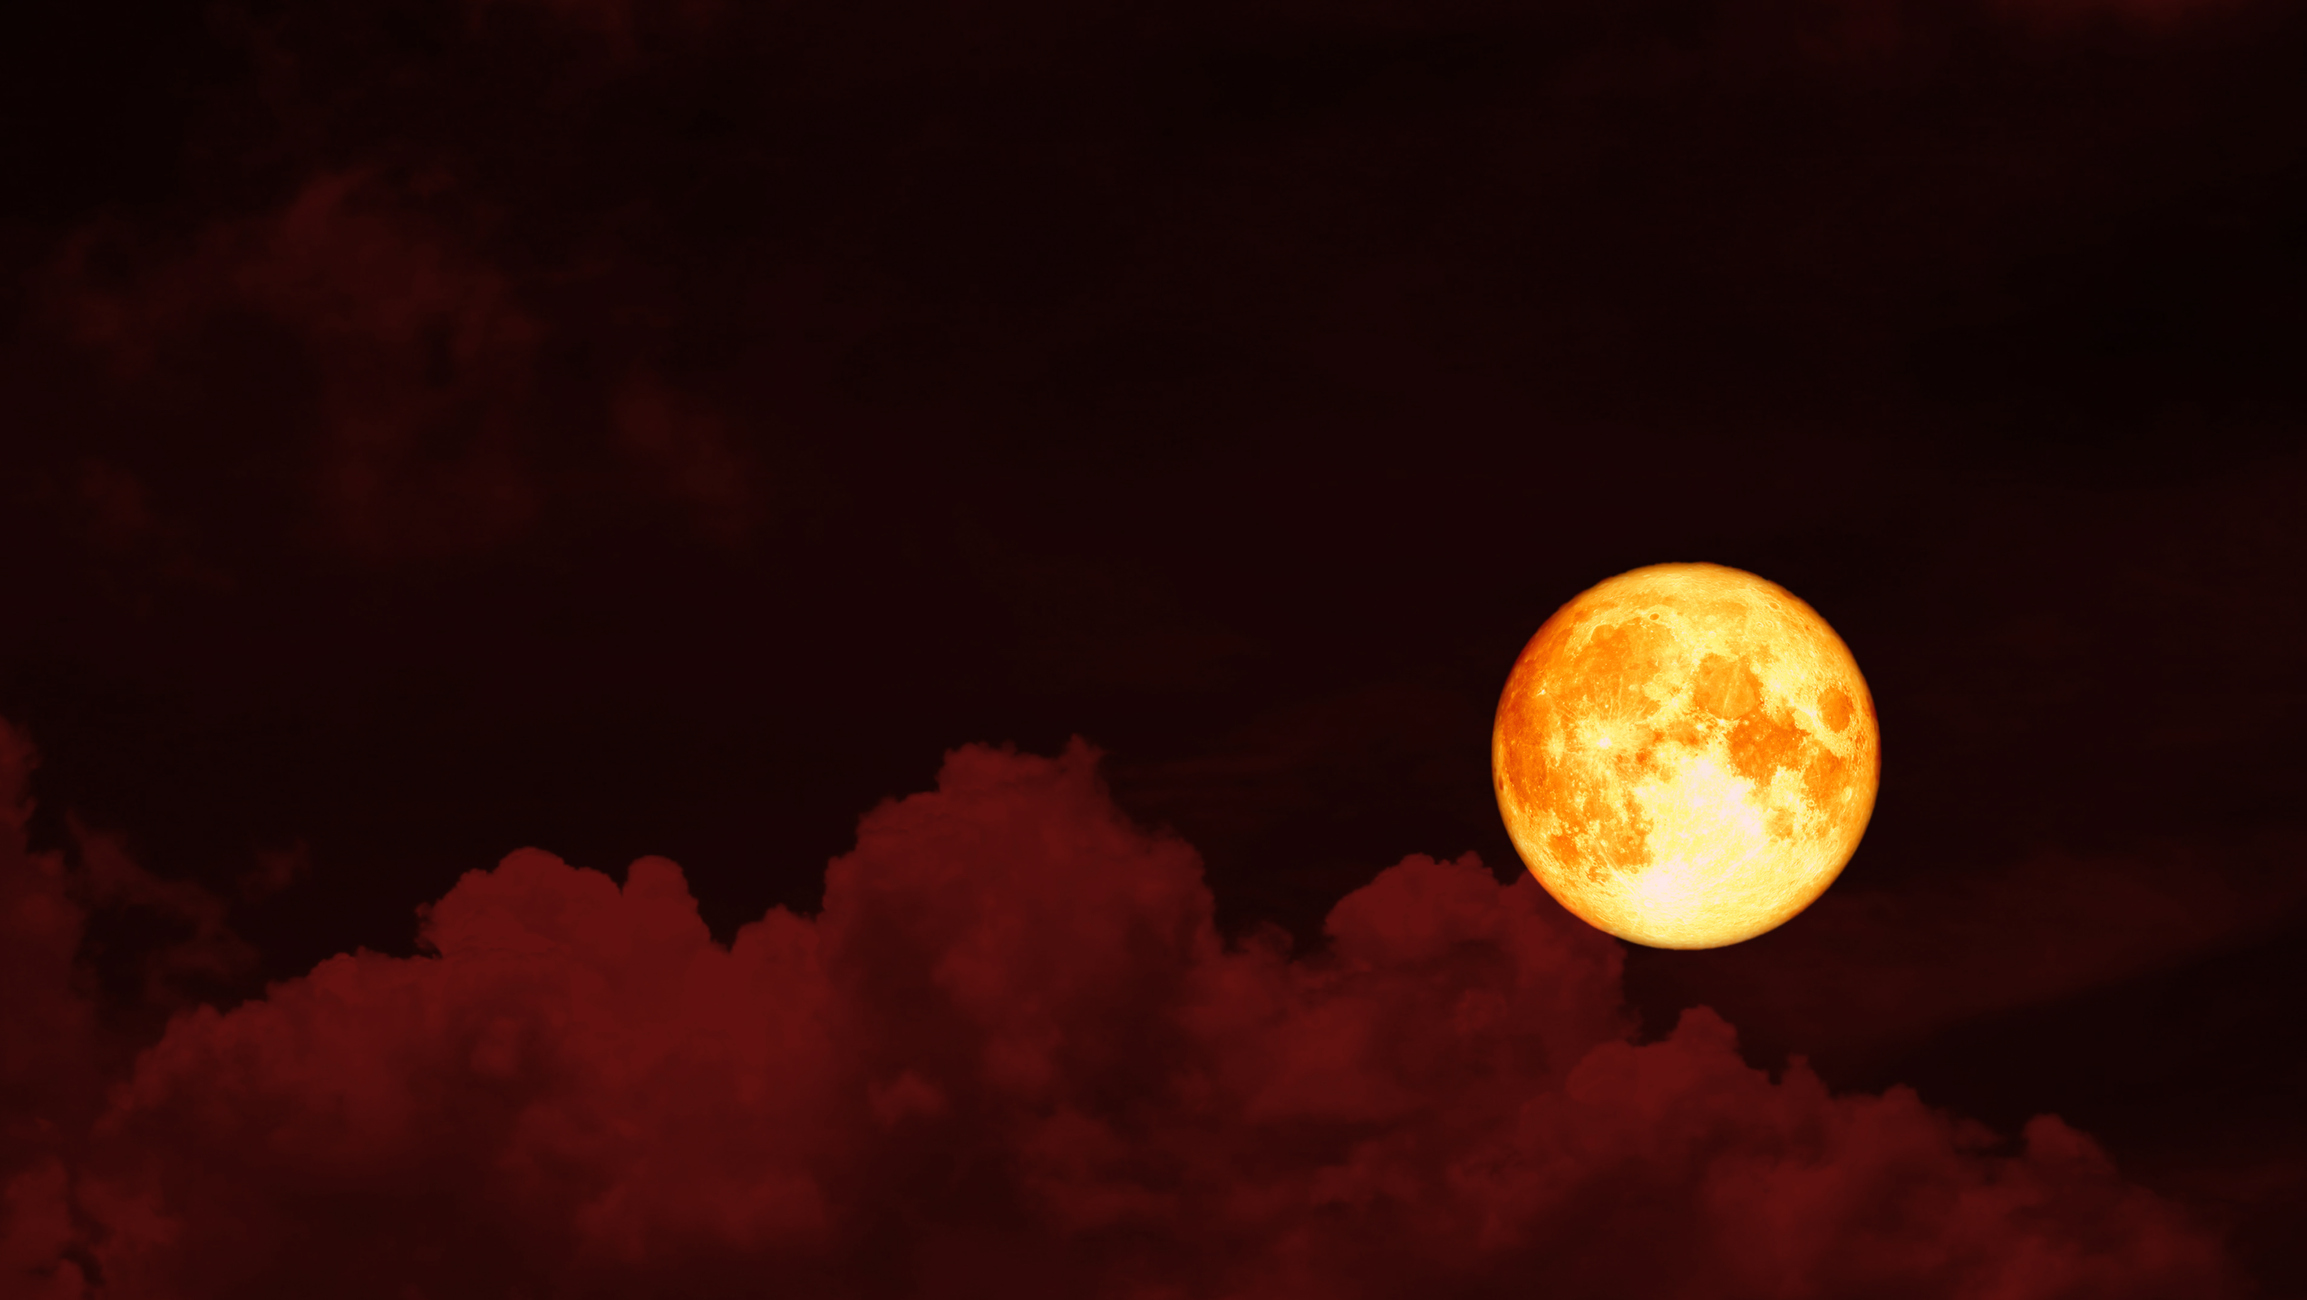 A blood moon in the red night sky.